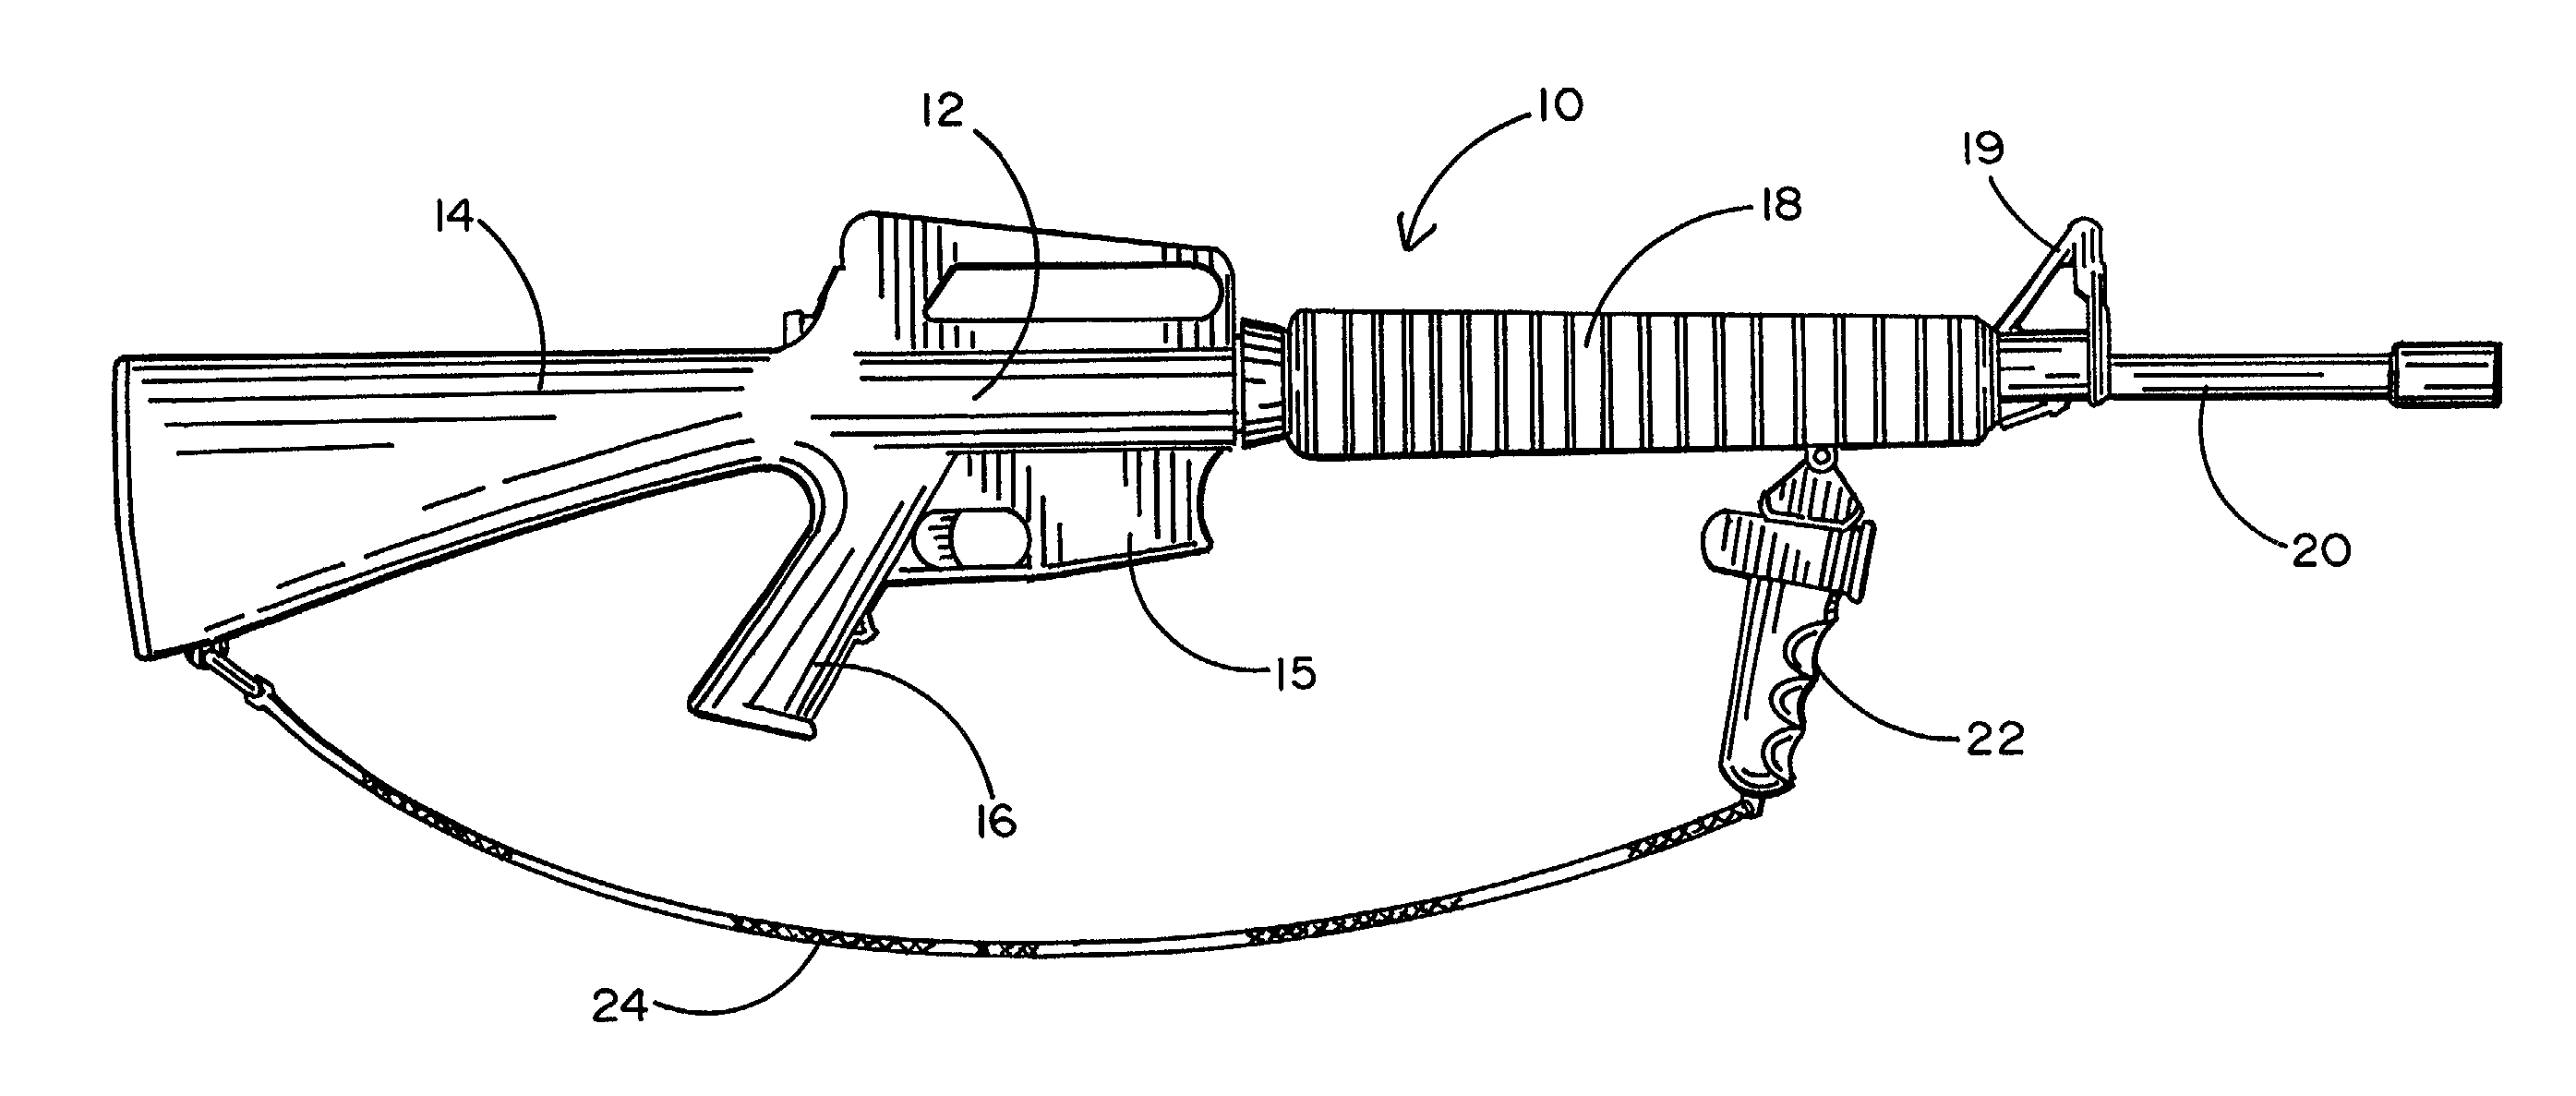 Electrical discharge weapon for use as forend grip of rifles